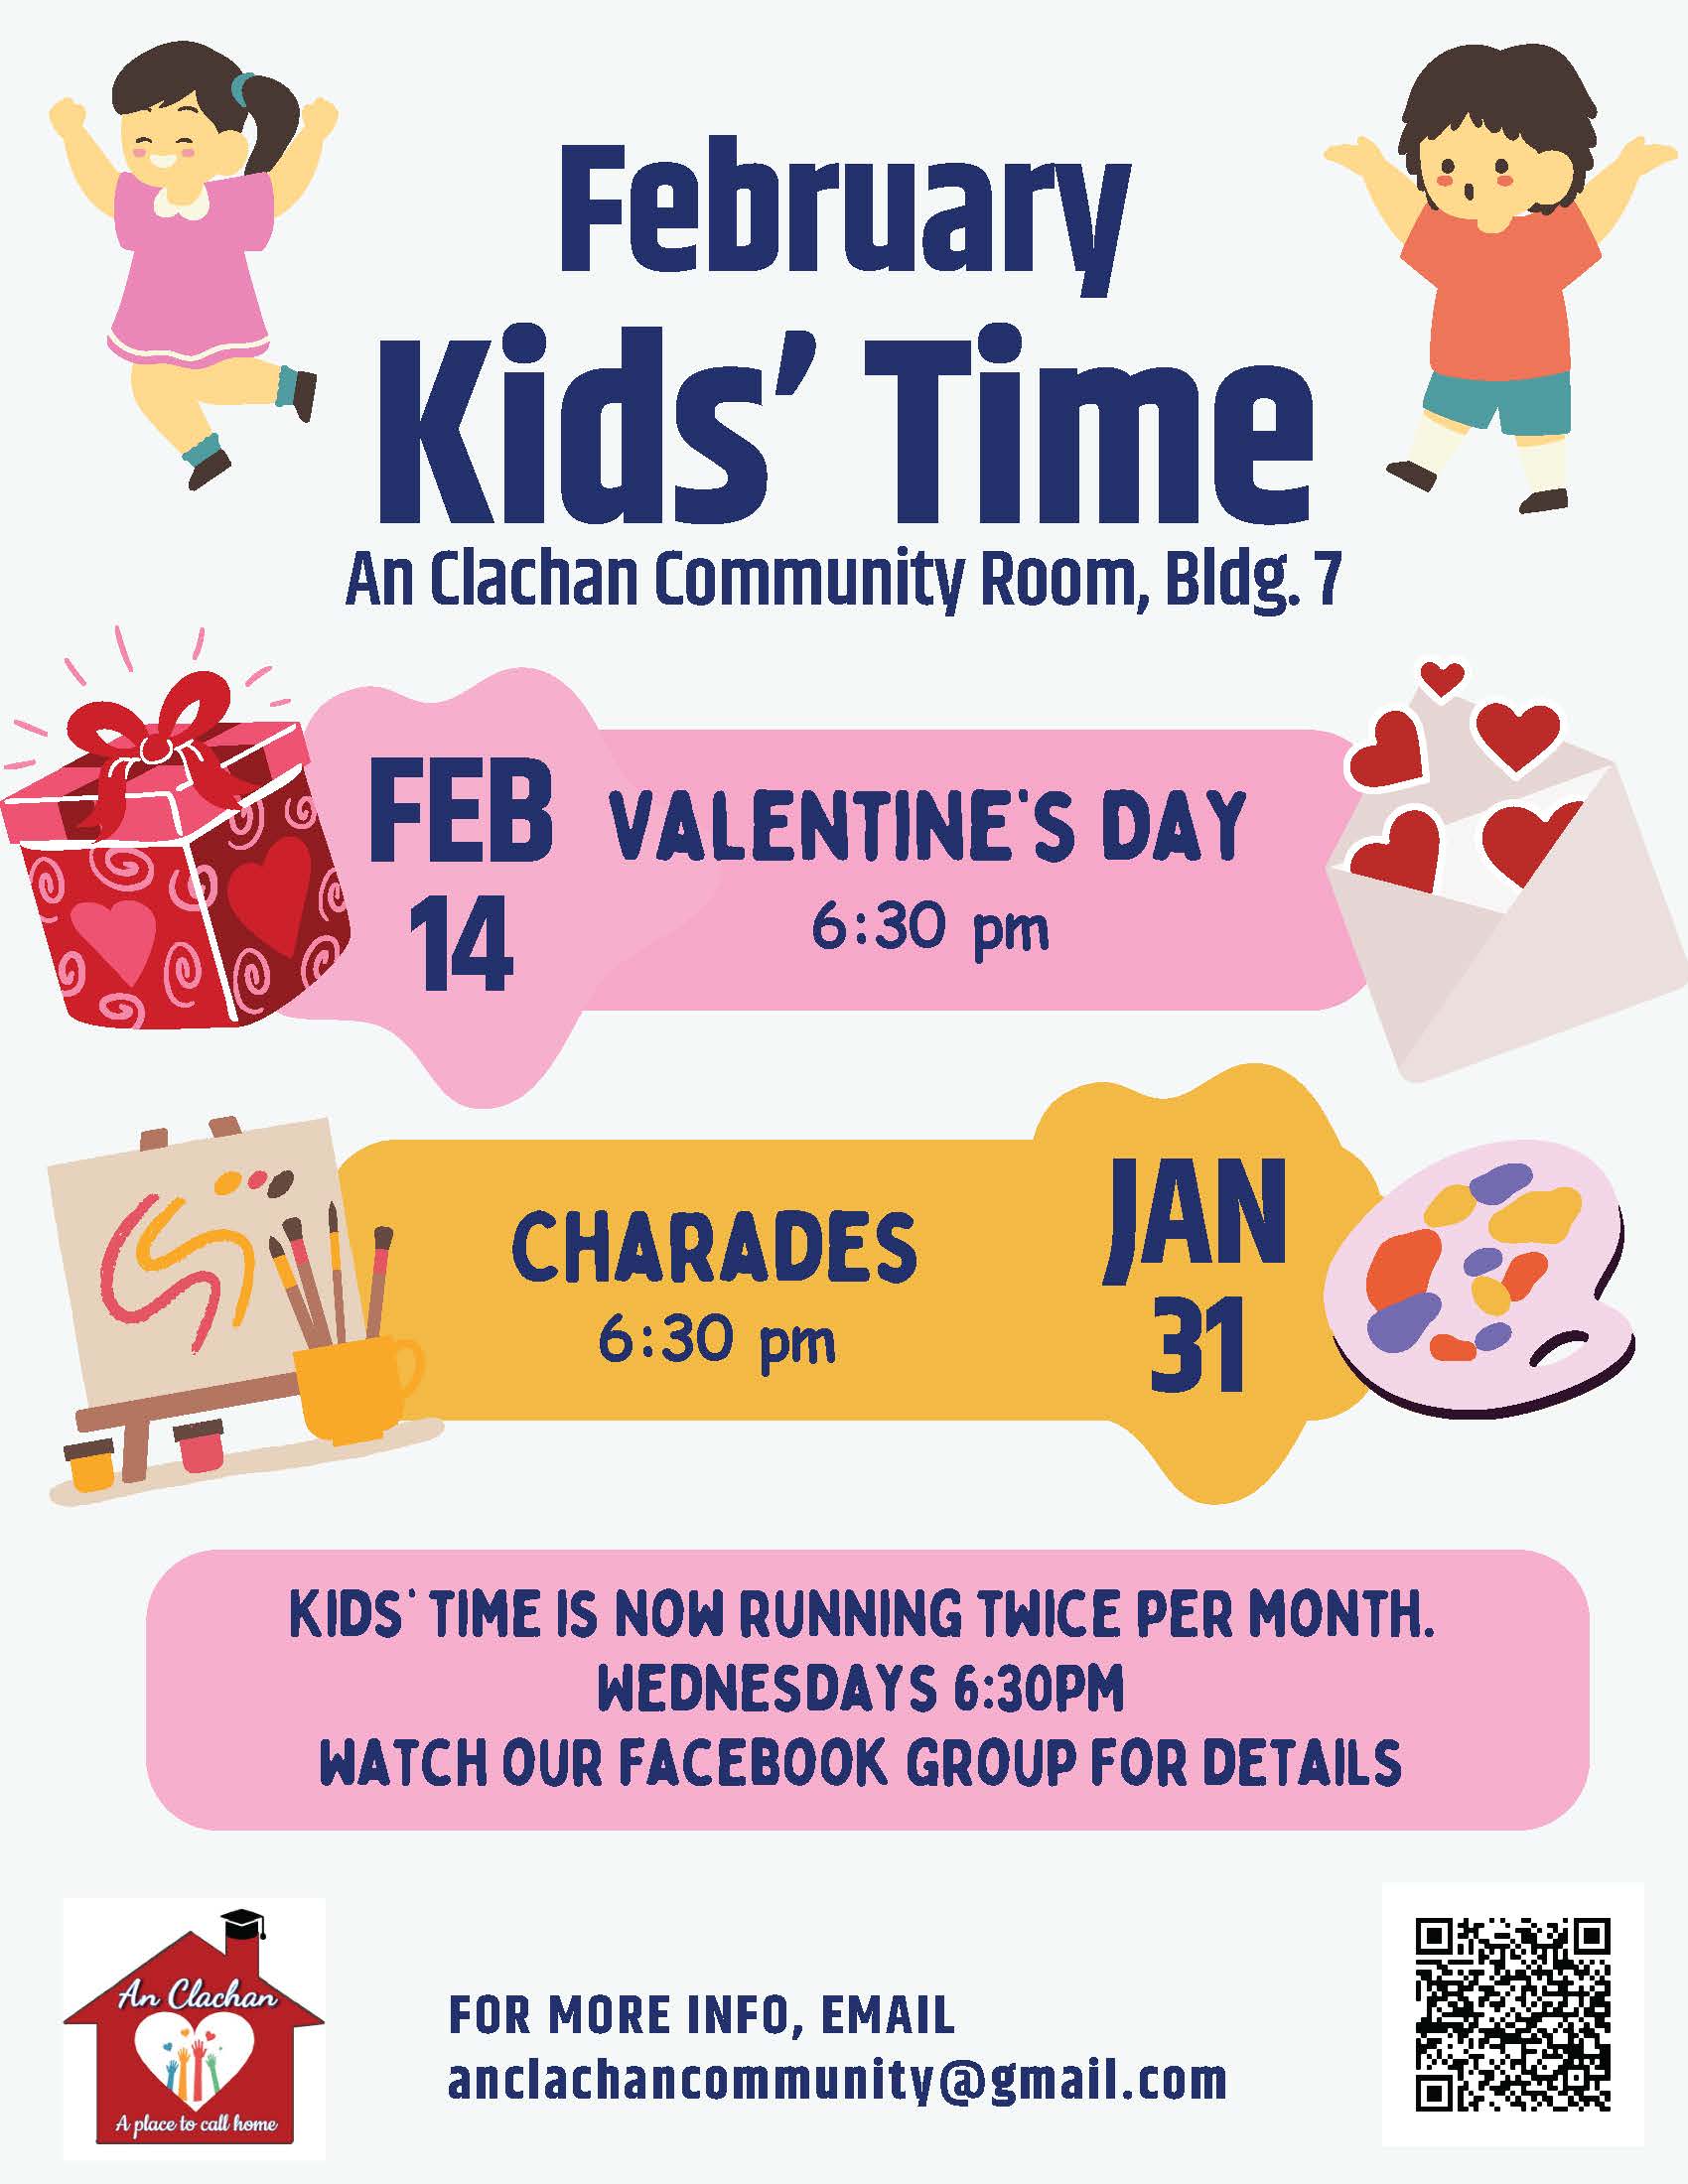 February Kids' Time. An Clachan Community Room, Building 7. Feb 14th - Valentine's Day - 6:30PM. Kid's time is now running twice per month. Wednesdays at 6:30PM. Watch our Facebook group for details. For more information, email anclachancommunity@gmail.com